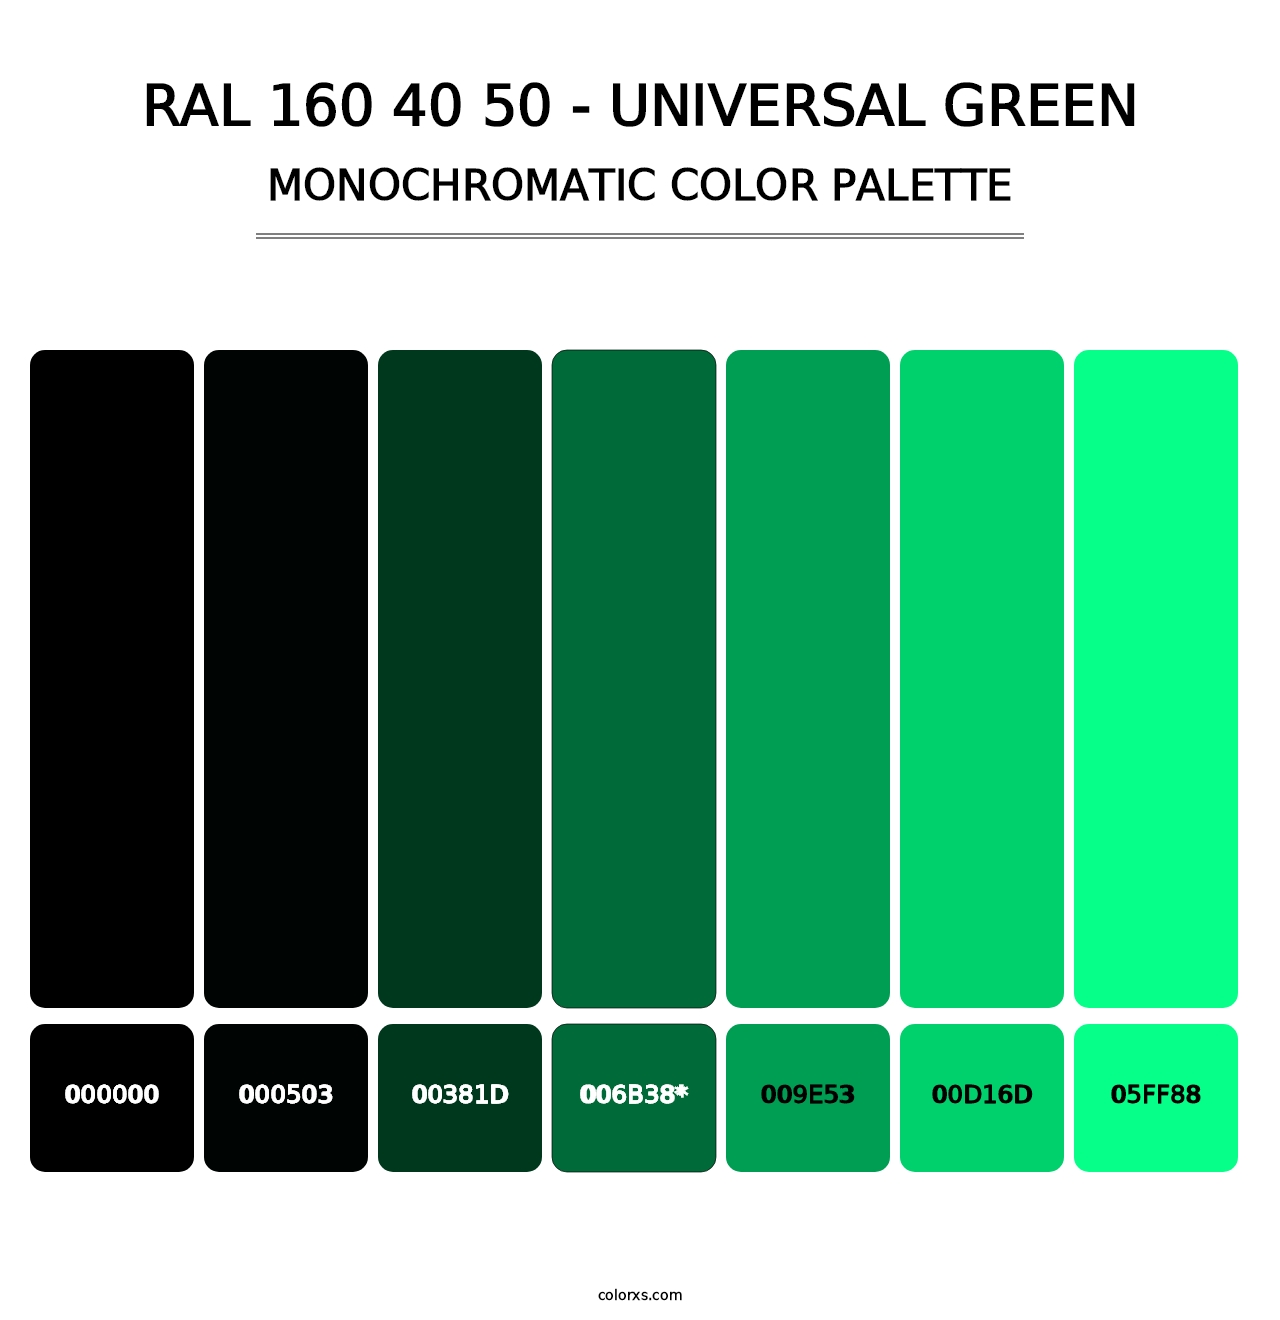 RAL 160 40 50 - Universal Green - Monochromatic Color Palette